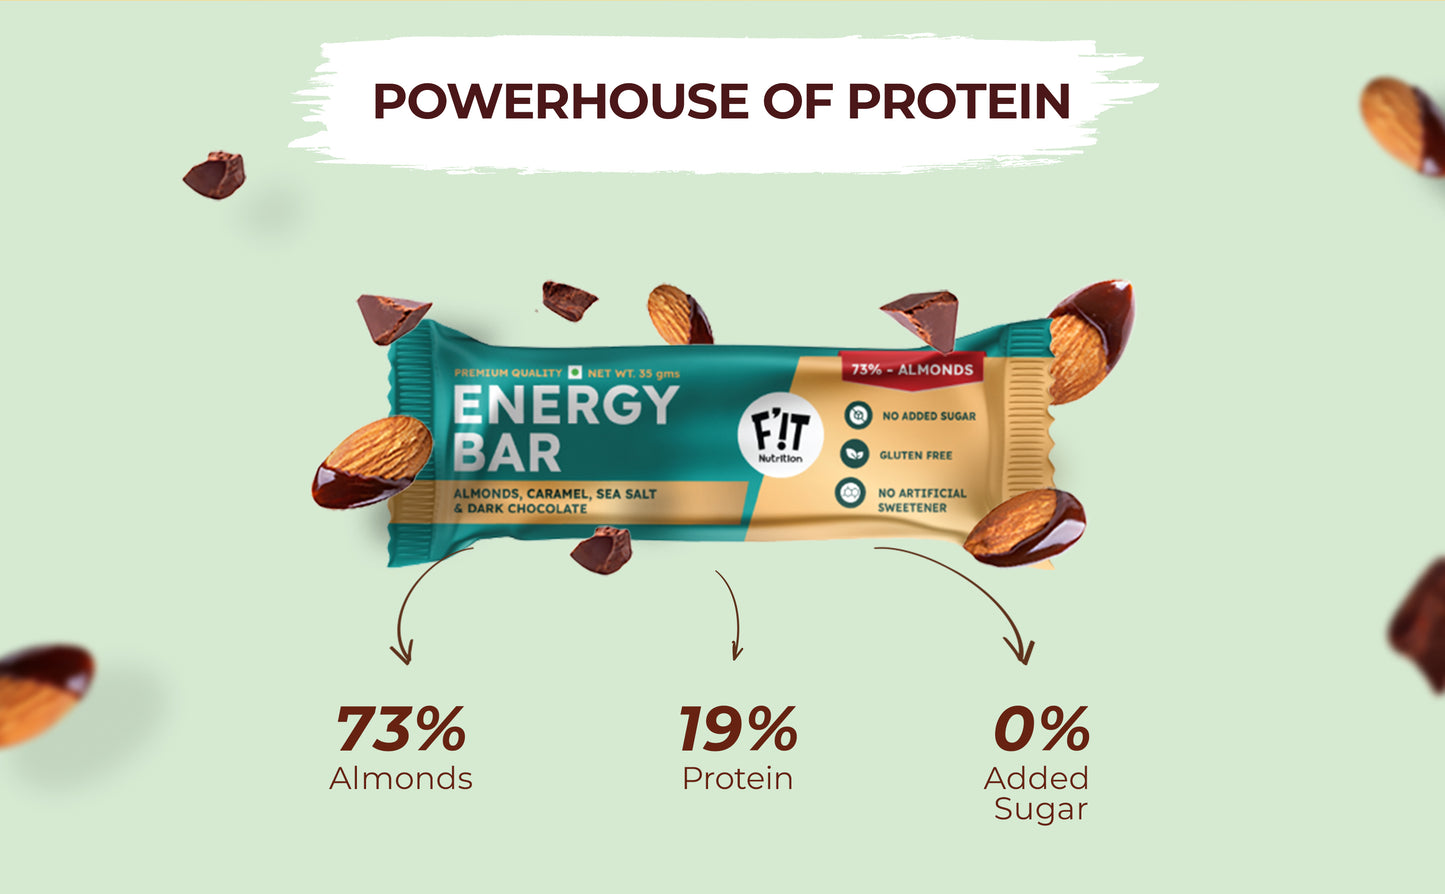 Pack of 12 | Almonds(73%), Sea Salt & Dark Chocolate and Seeds, Nuts & Cranberries(70%) | Pack of 12 | No Added Sugar | Protein & Fiber rich